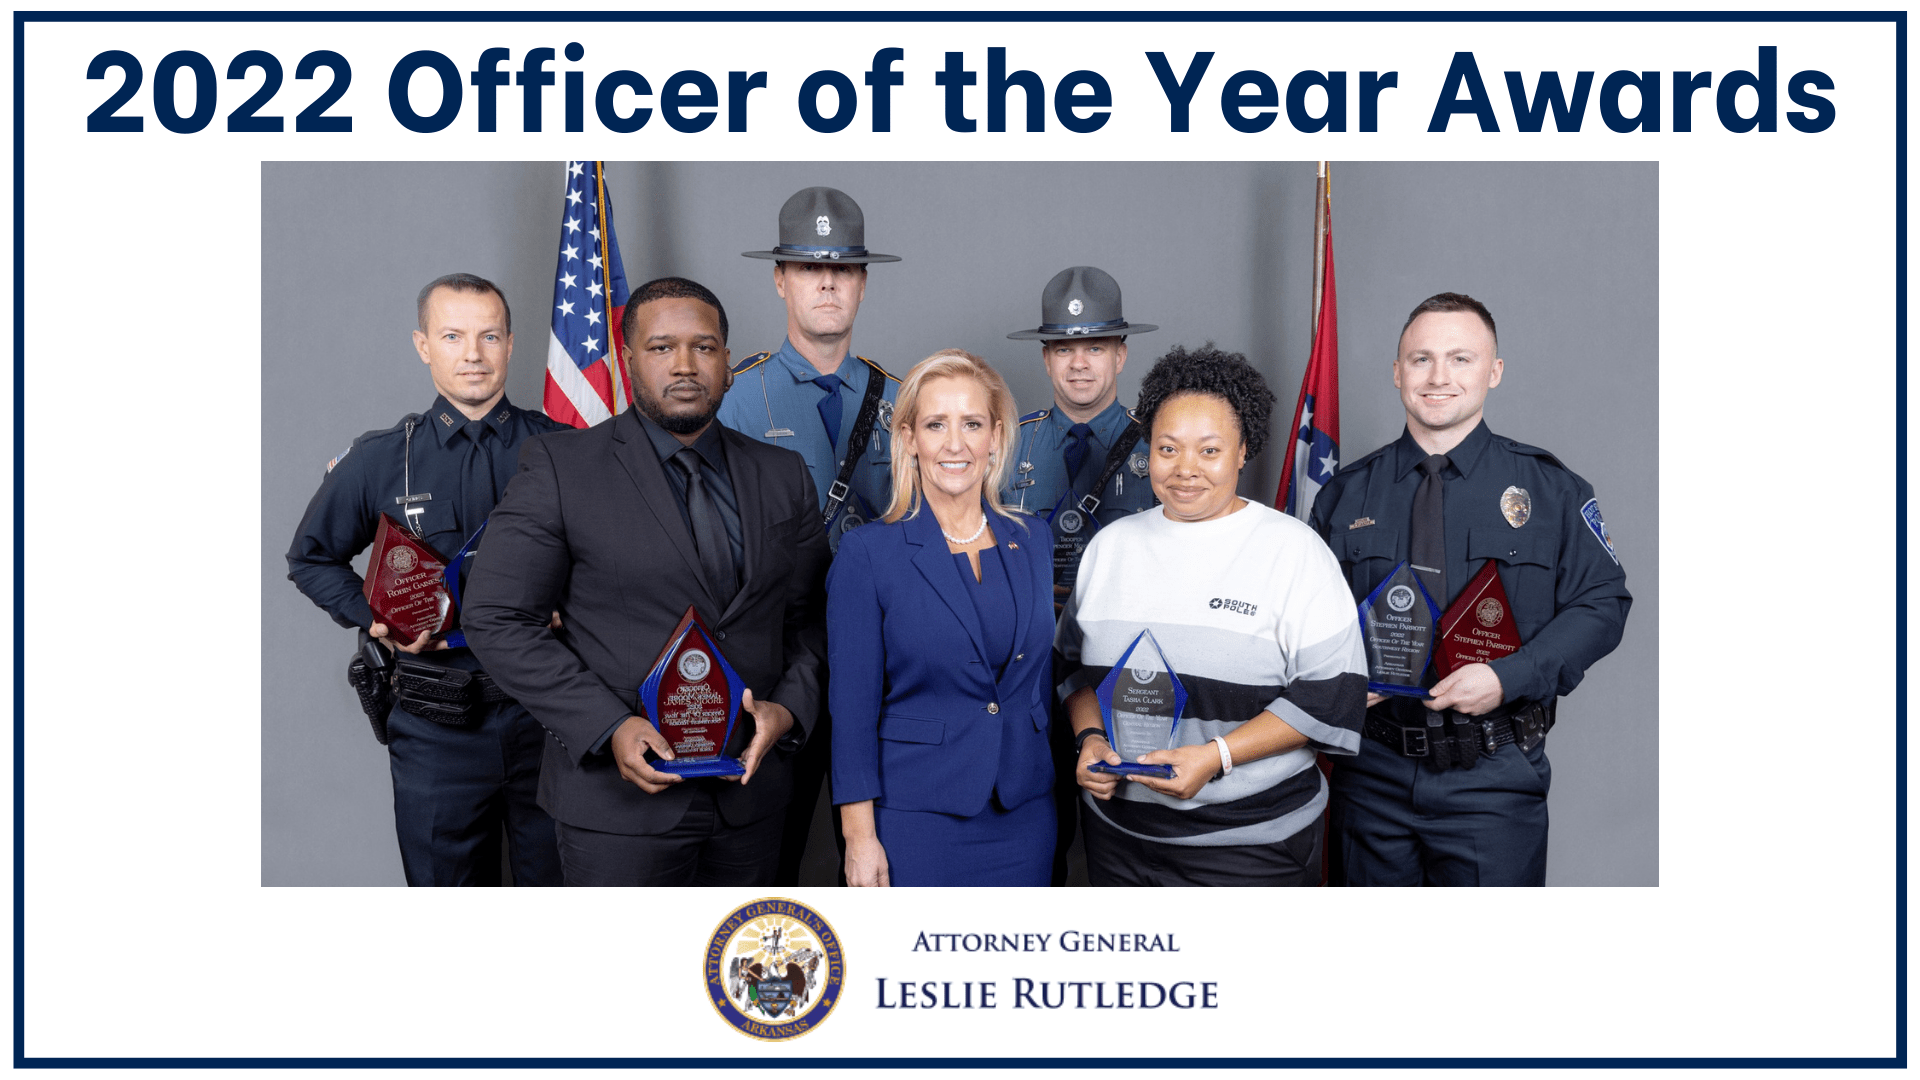 2022 Officer of the Year Award Winners